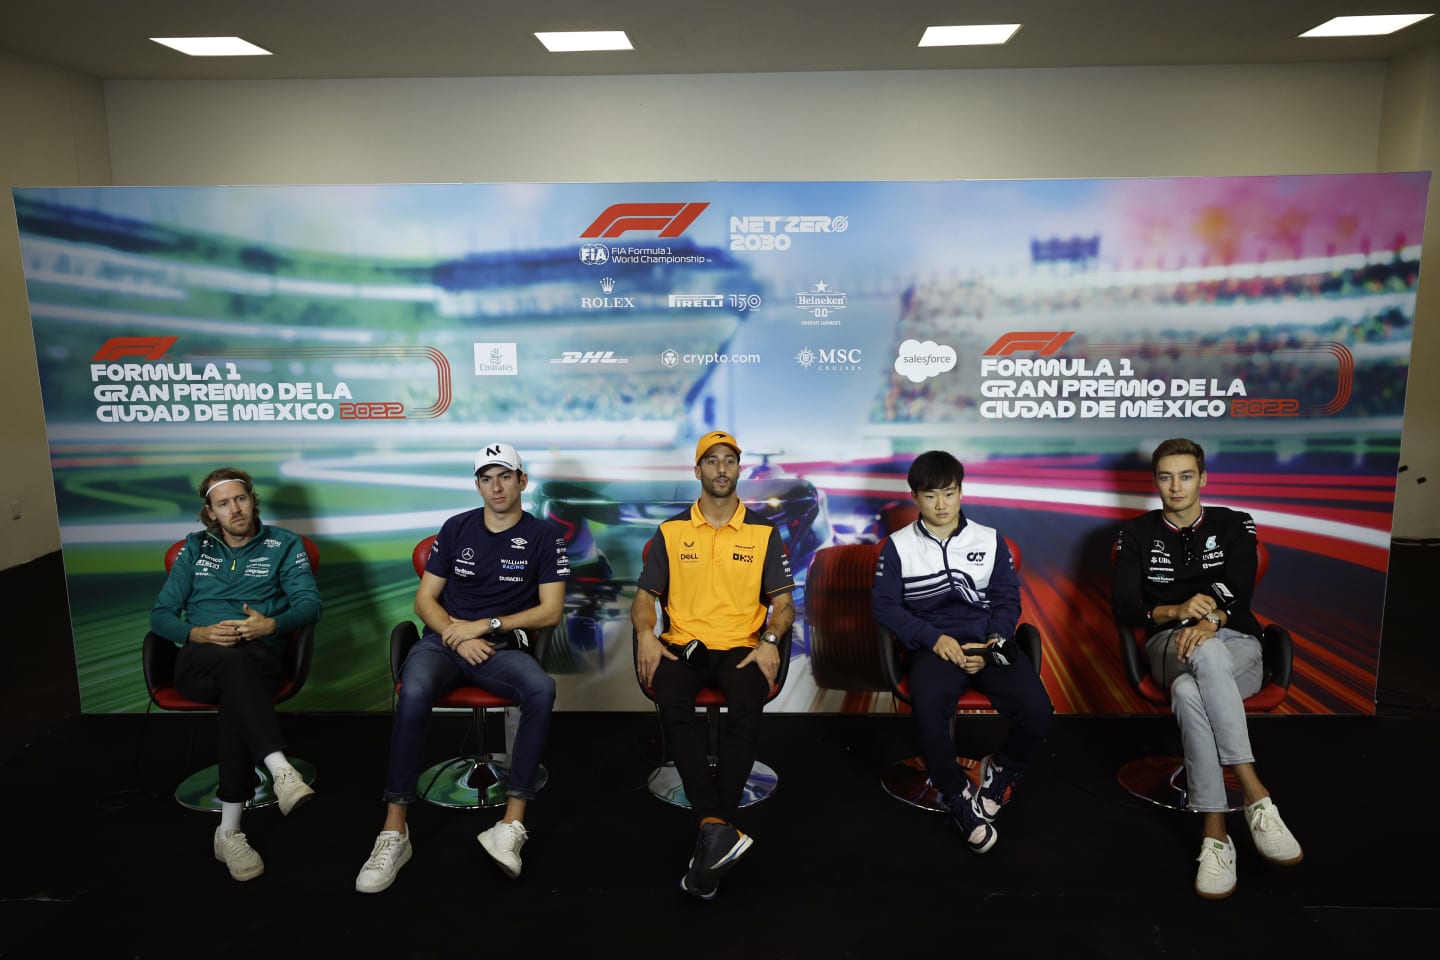 MEXICO CITY, MEXICO - OCTOBER 27: (L-R) Sebastian Vettel of Germany and Aston Martin F1 Team, Nicholas Latifi of Canada and Williams, Daniel Ricciardo of Australia and McLaren, Yuki Tsunoda of Japan and Scuderia AlphaTauri and George Russell of Great Britain and Mercedes attend the Drivers Press Conference during previews ahead of the F1 Grand Prix of Mexico at Autodromo Hermanos Rodriguez on October 27, 2022 in Mexico City, Mexico. (Photo by Jared C. Tilton/Getty Images)